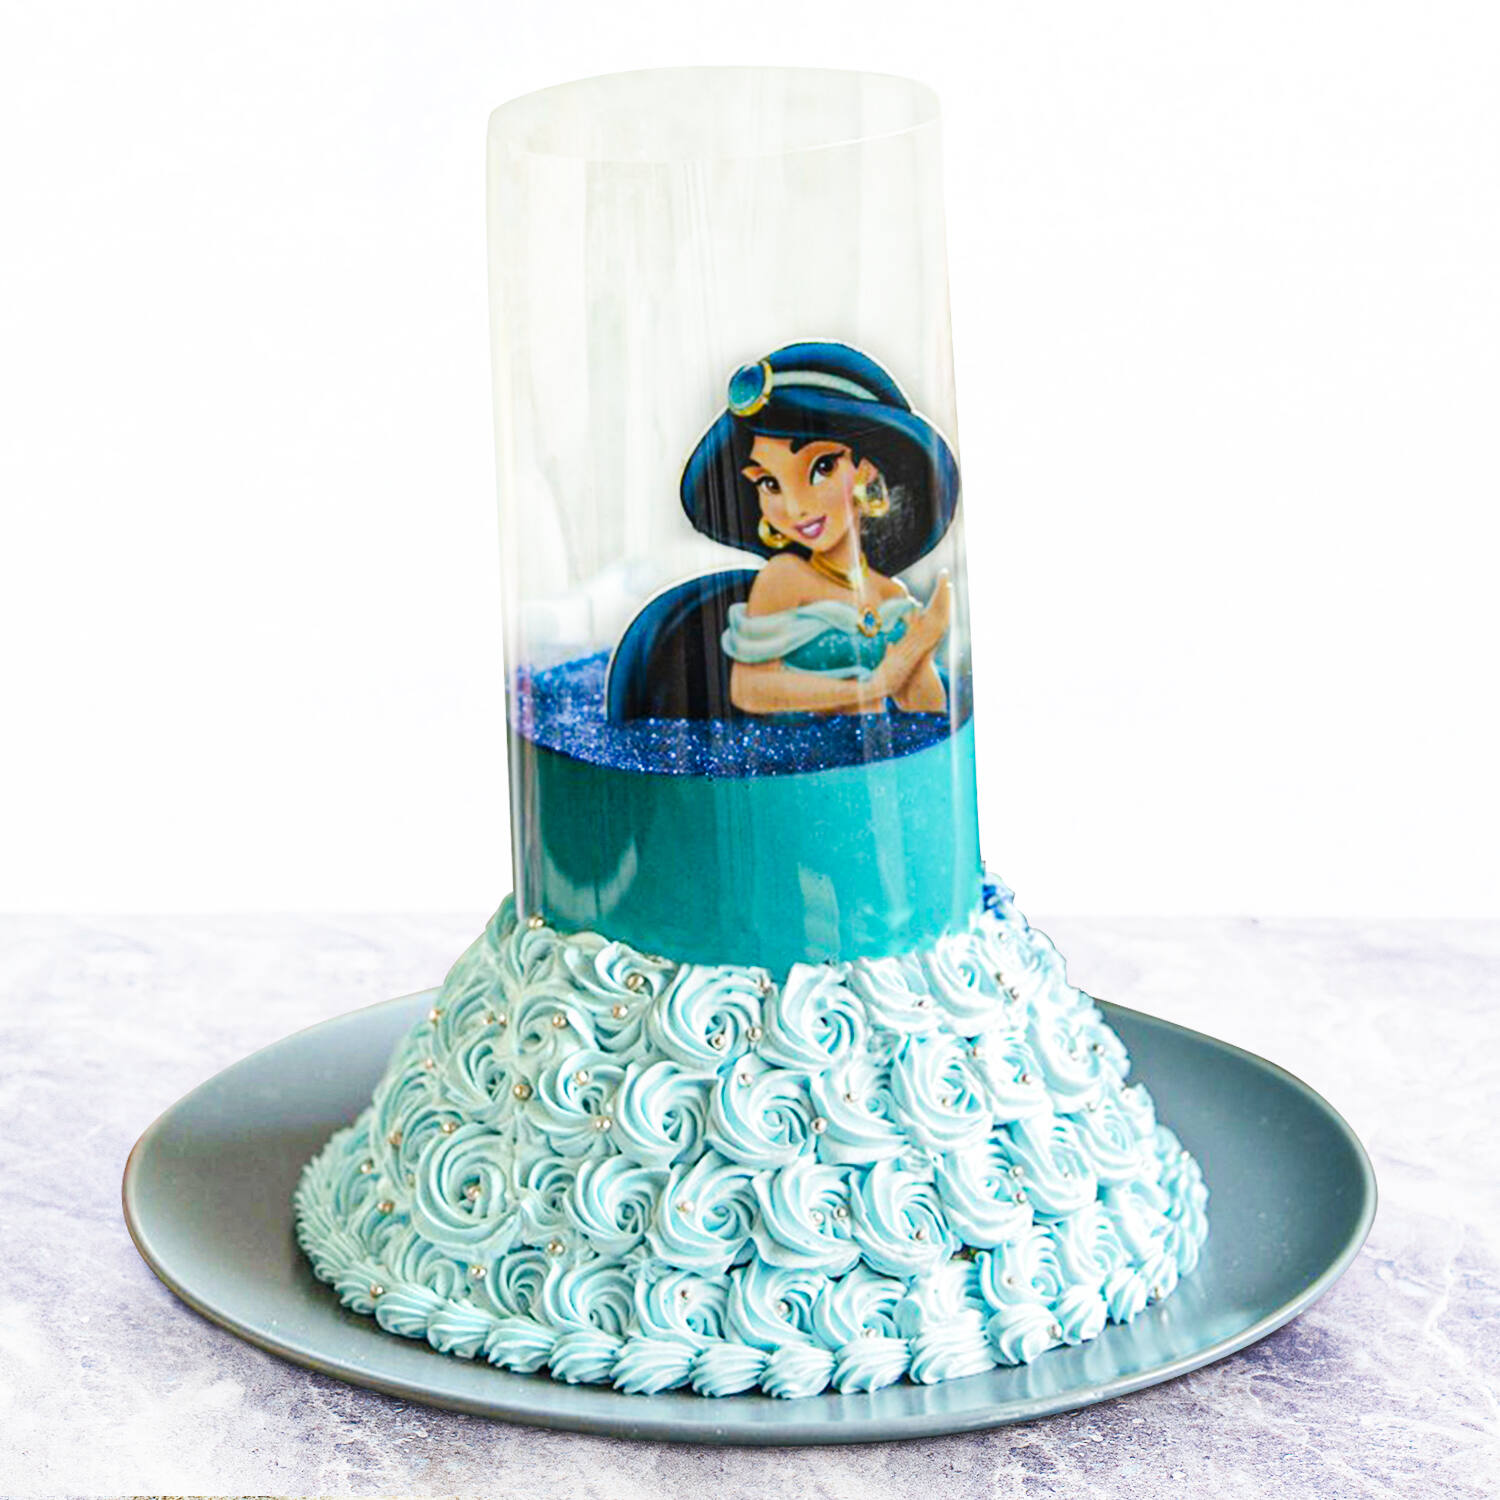 Glam girl sitting on cake with age - Cake Toppers